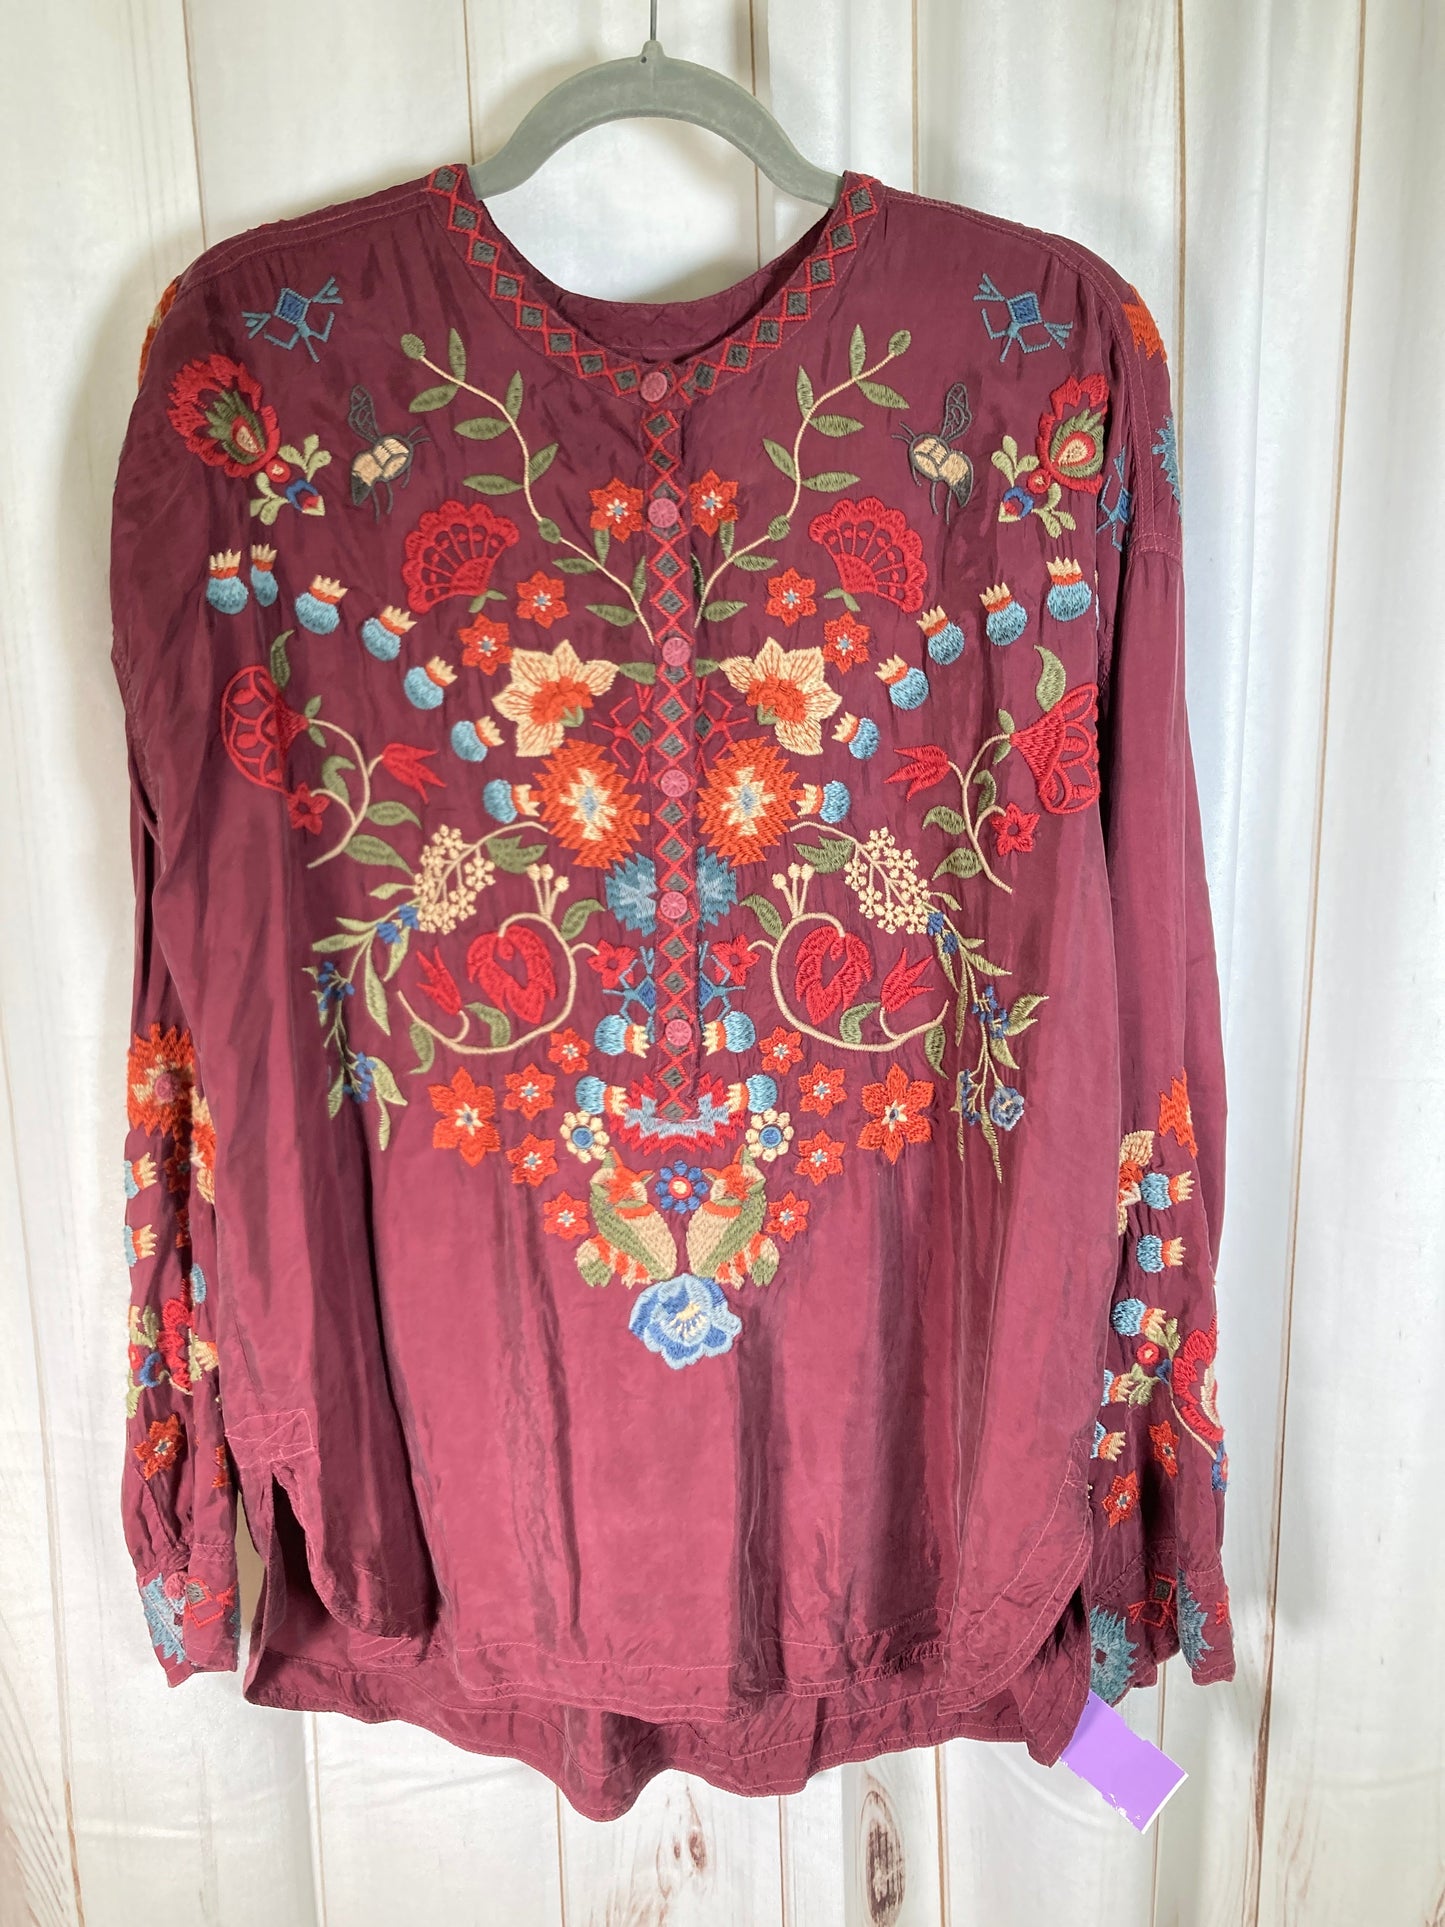 Red & Yellow Top Long Sleeve Designer Johnny Was, Size S